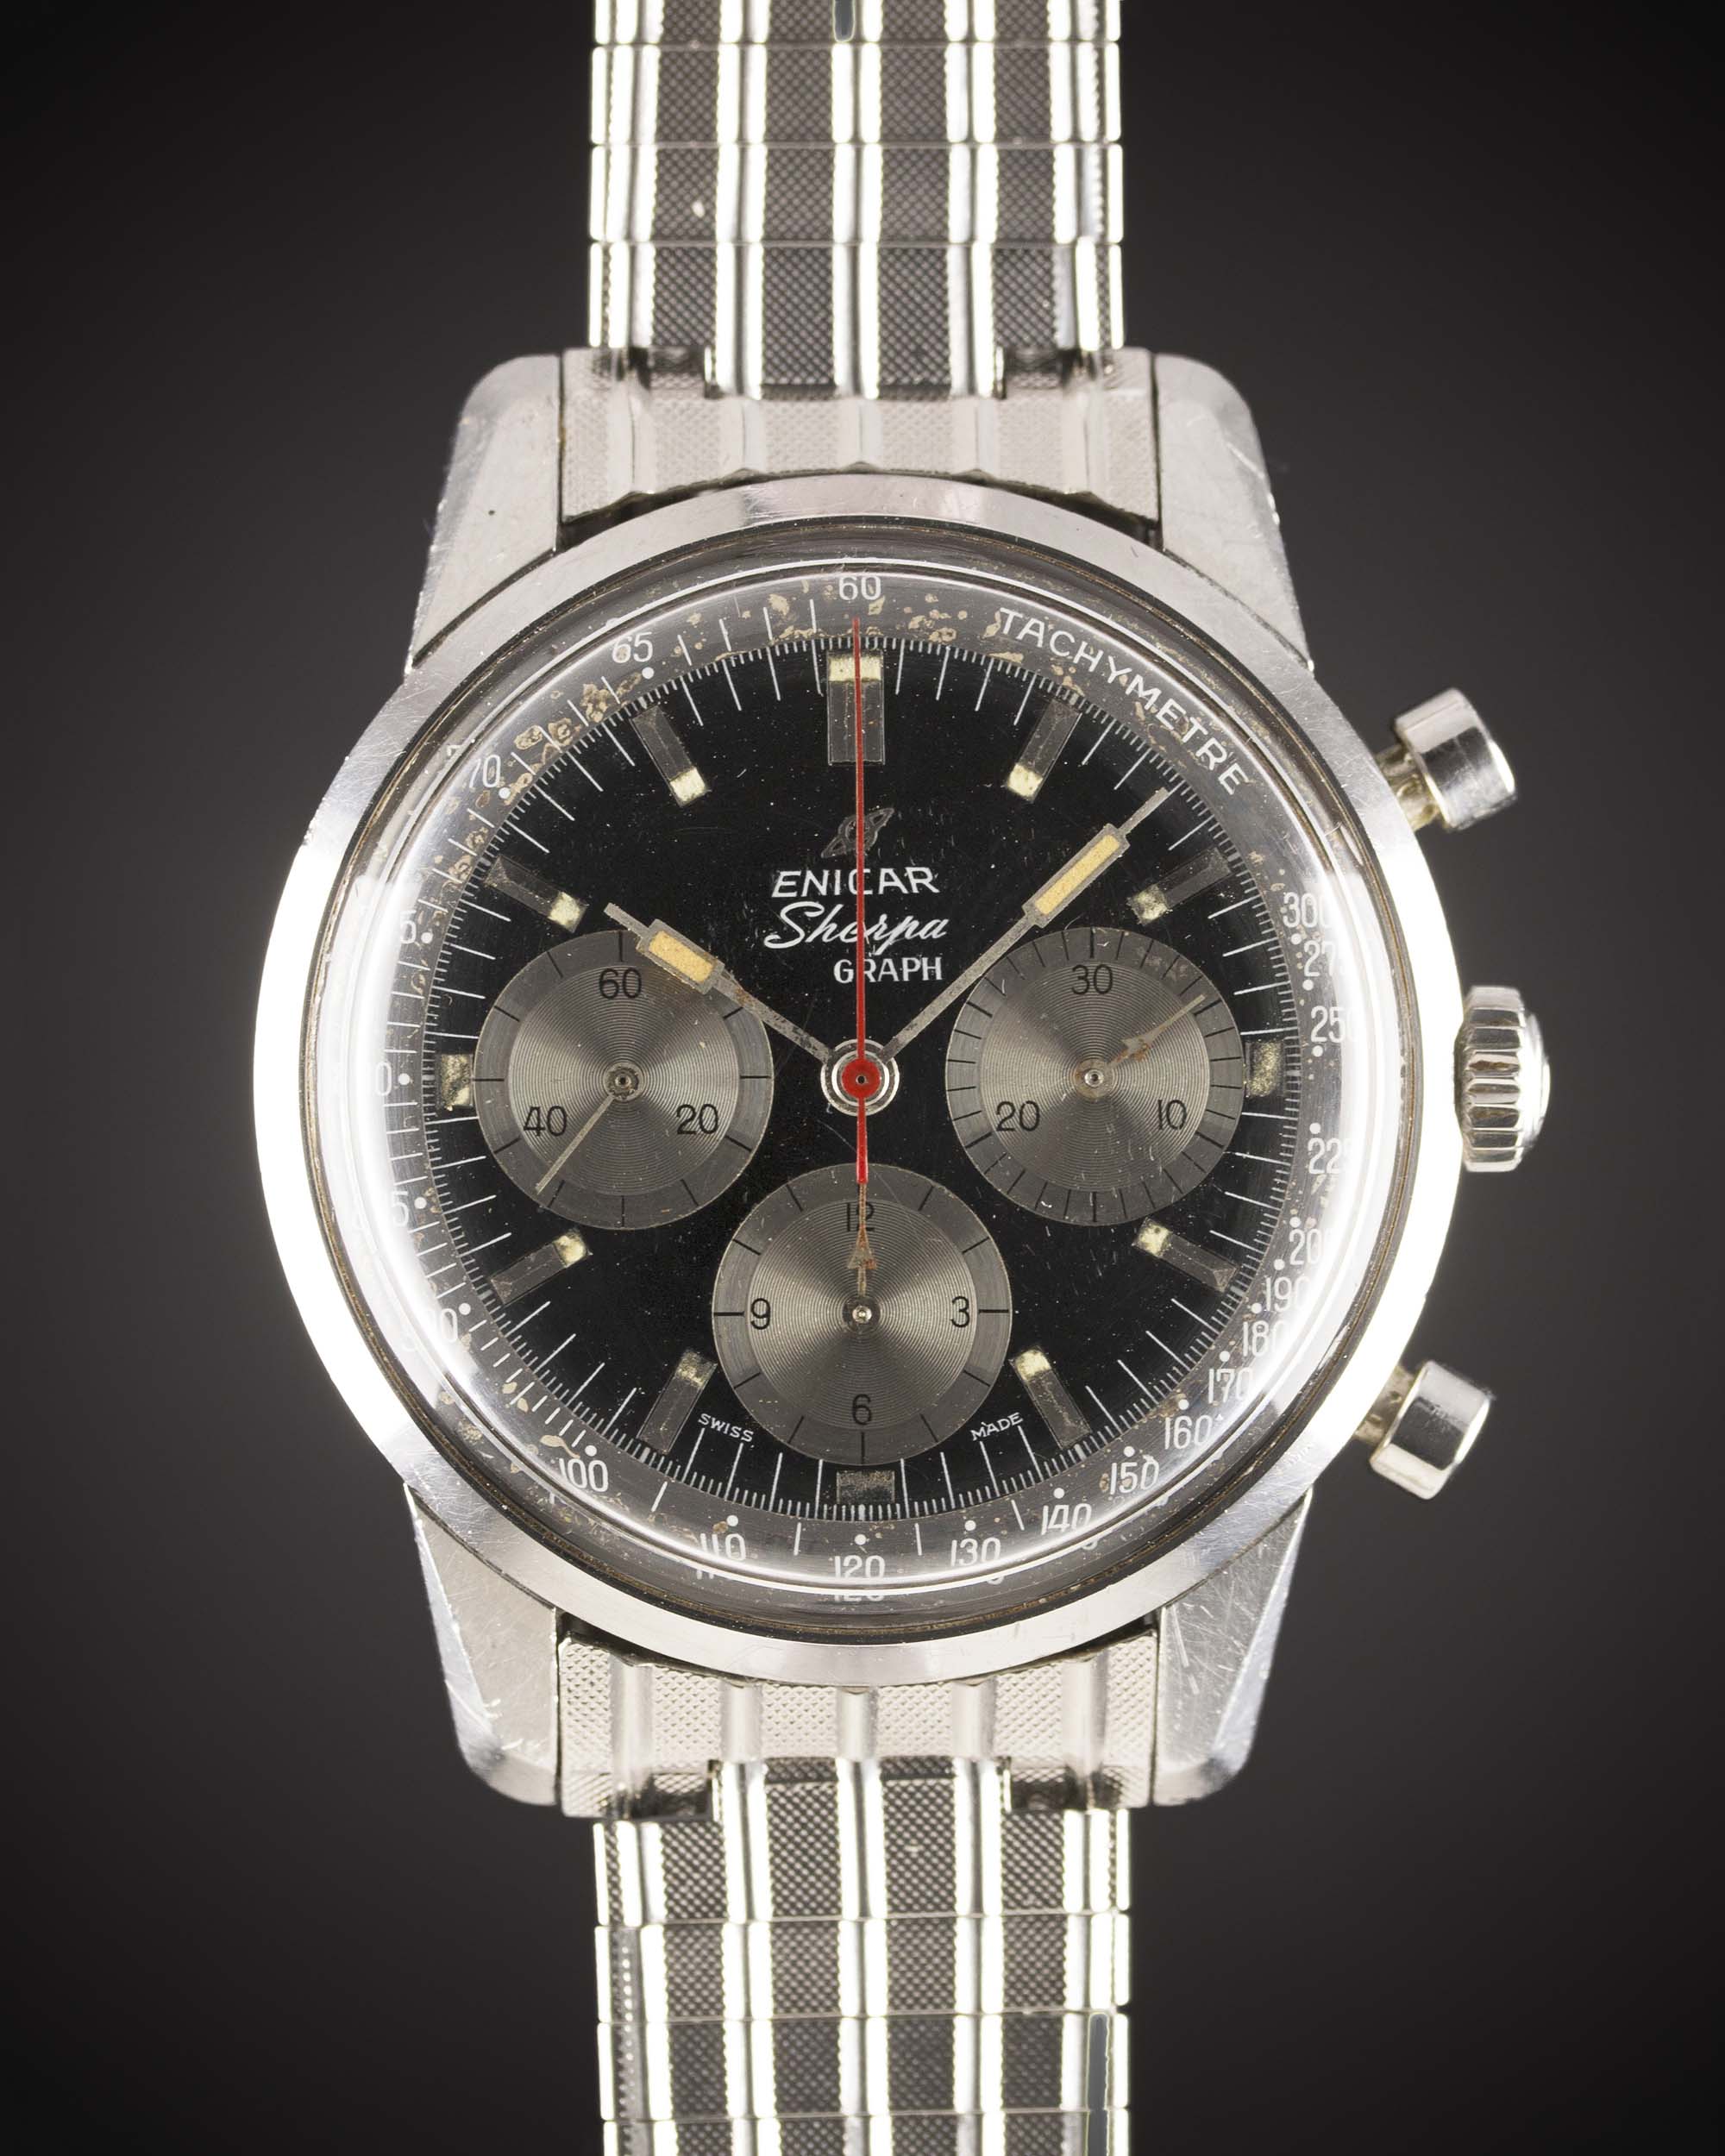 A RARE GENTLEMAN'S STAINLESS STEEL ENICAR SHERPA GRAPH CHRONOGRAPH BRACELET WATCH CIRCA 1960s, - Image 2 of 2